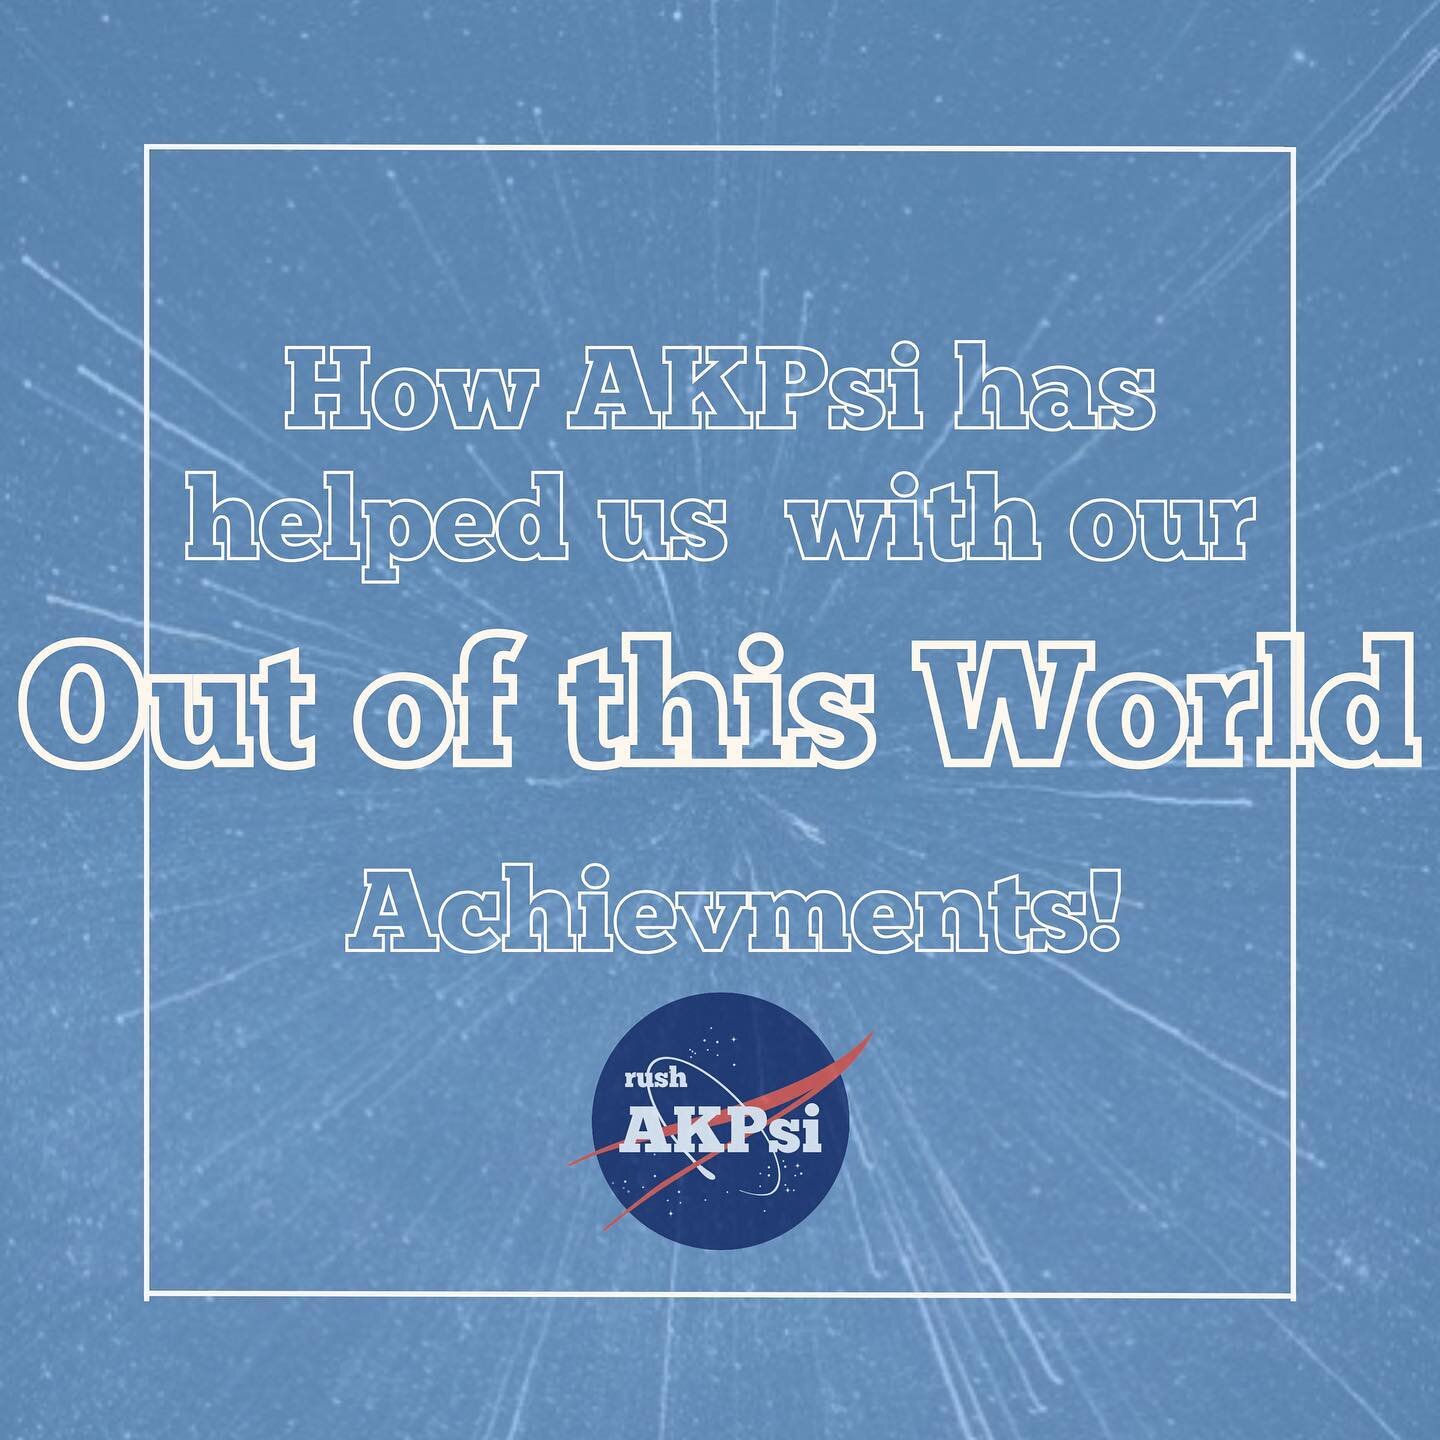 AKPsi not only offers our members an incredible brotherhood, but resources, tools, and connections to bring their future to new heights🚀⭐️ 

Four of our bros wrote a little bit on how AKPsi has helped them get their OUT OF THIS WORLD internships! 

